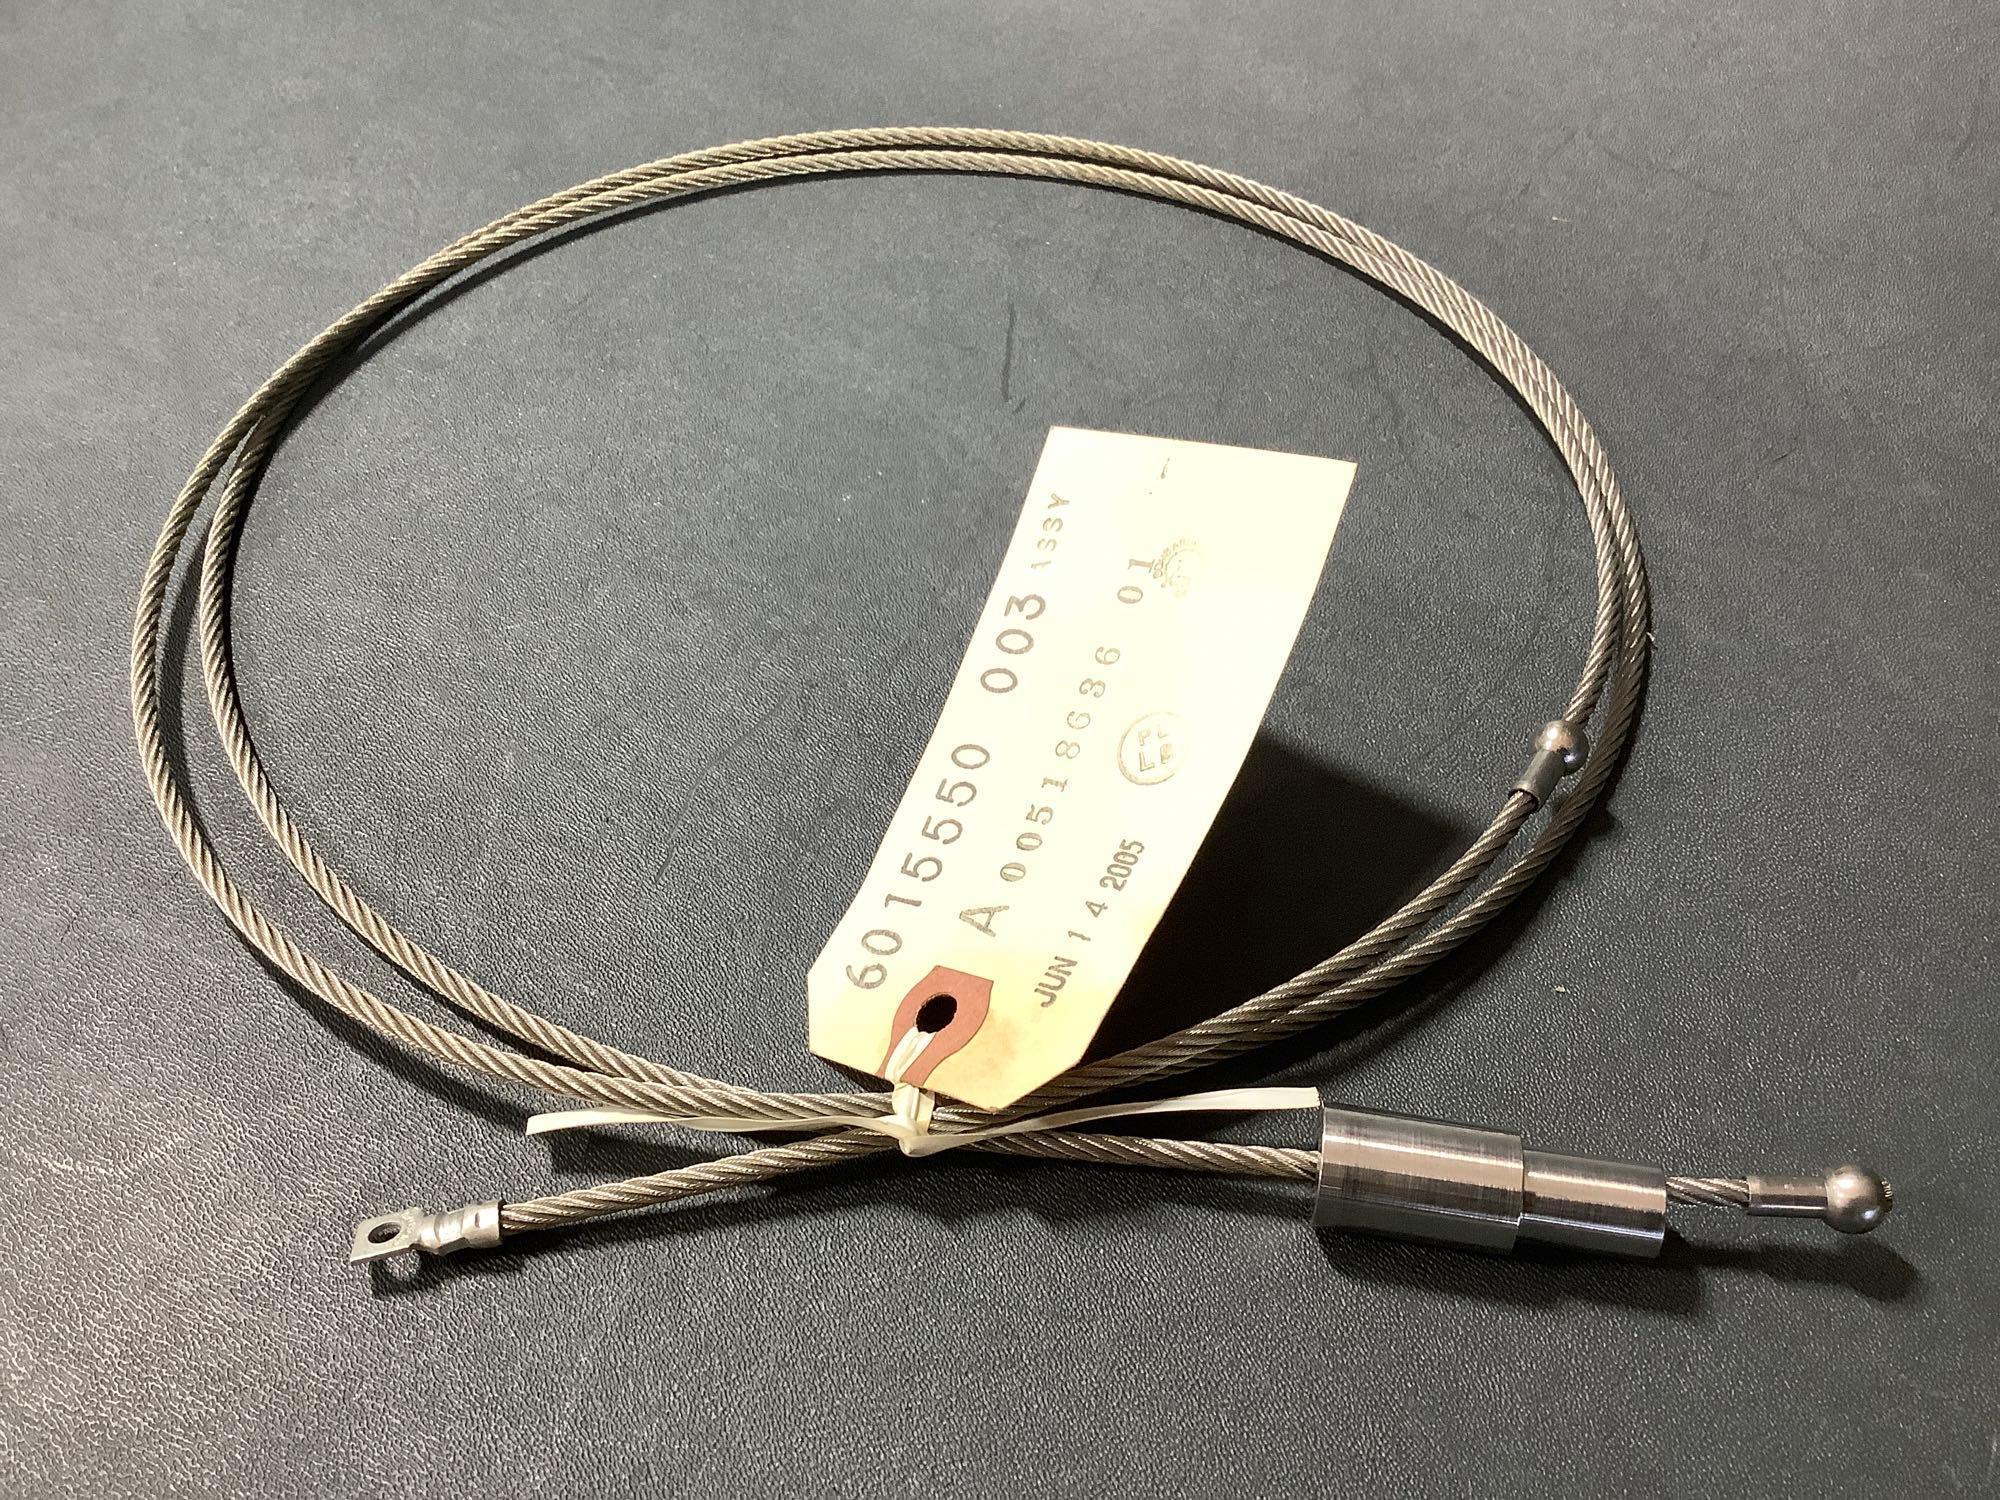 NEW LEARJET CABLES 5415542-26, -23, 2411660-13 & -34 & -16, & 6015550-003HP